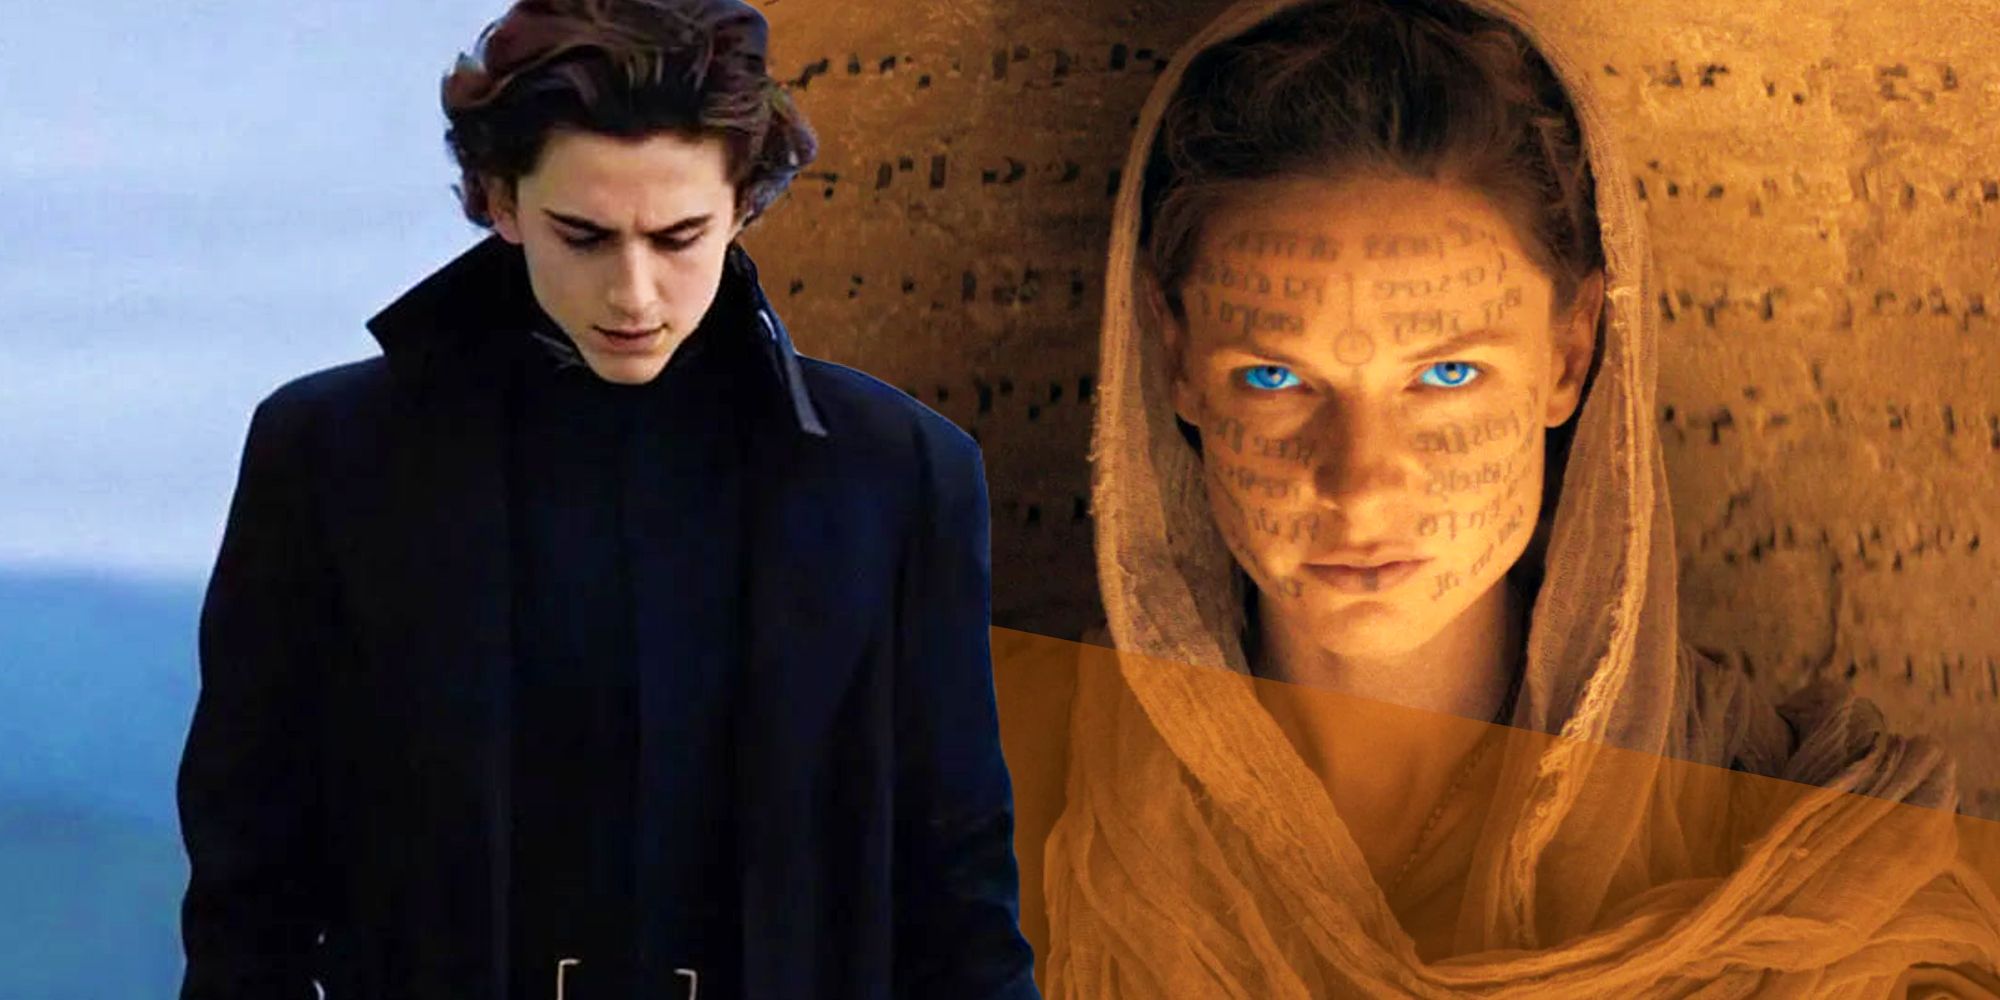 Paul Atreides wearing a black cloak next to Jessica looking at the camera angrily in  Dune: Part Two